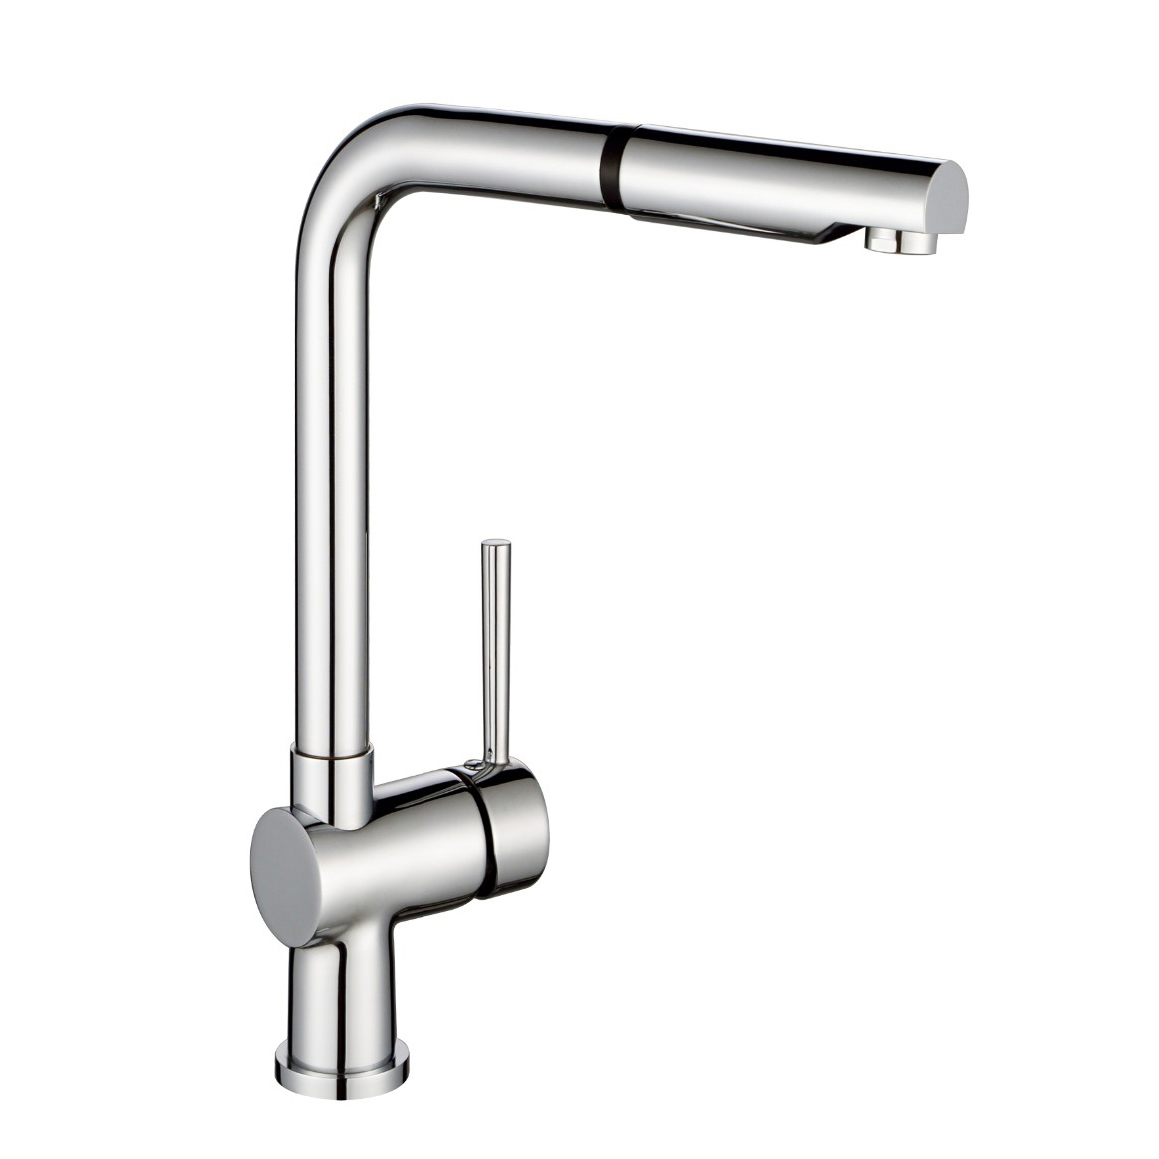 Mixer Tap Kitchen Faucets with Pull Down Sprayer